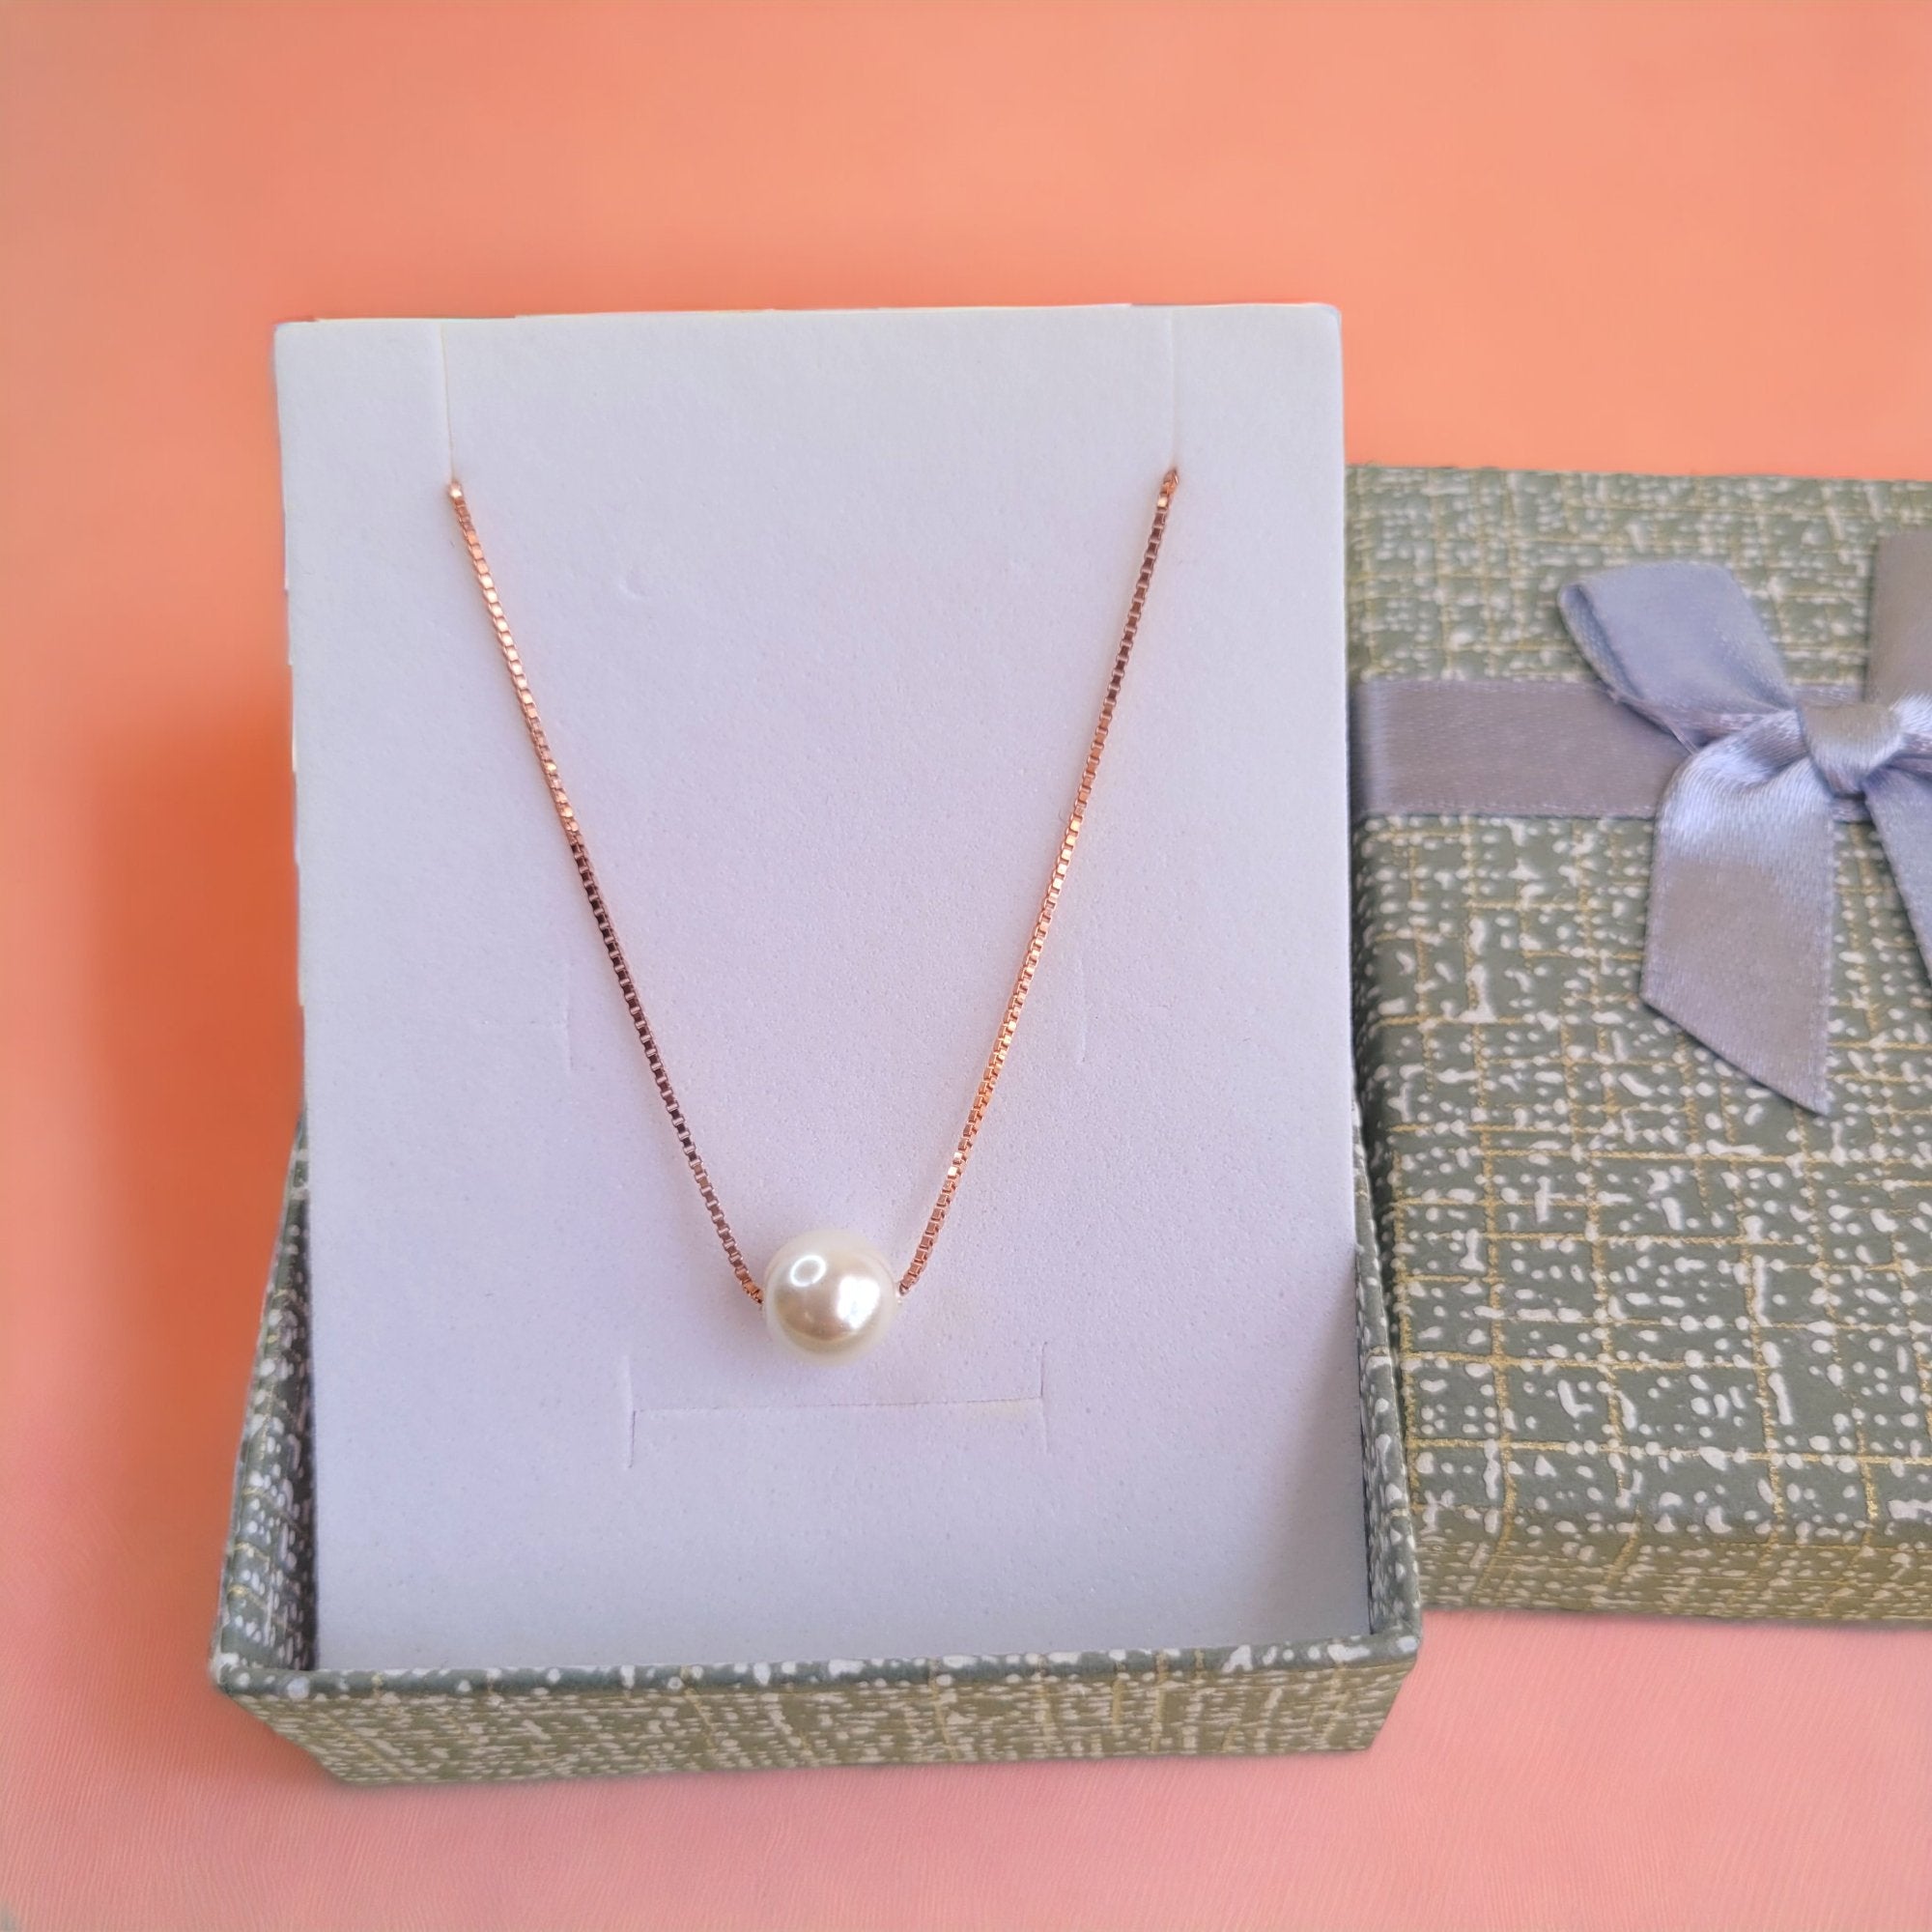 Rose Gold Finish Pendant and Earrings Set: Gift/Send Jewellery Gifts Online  J11131343 |IGP.com